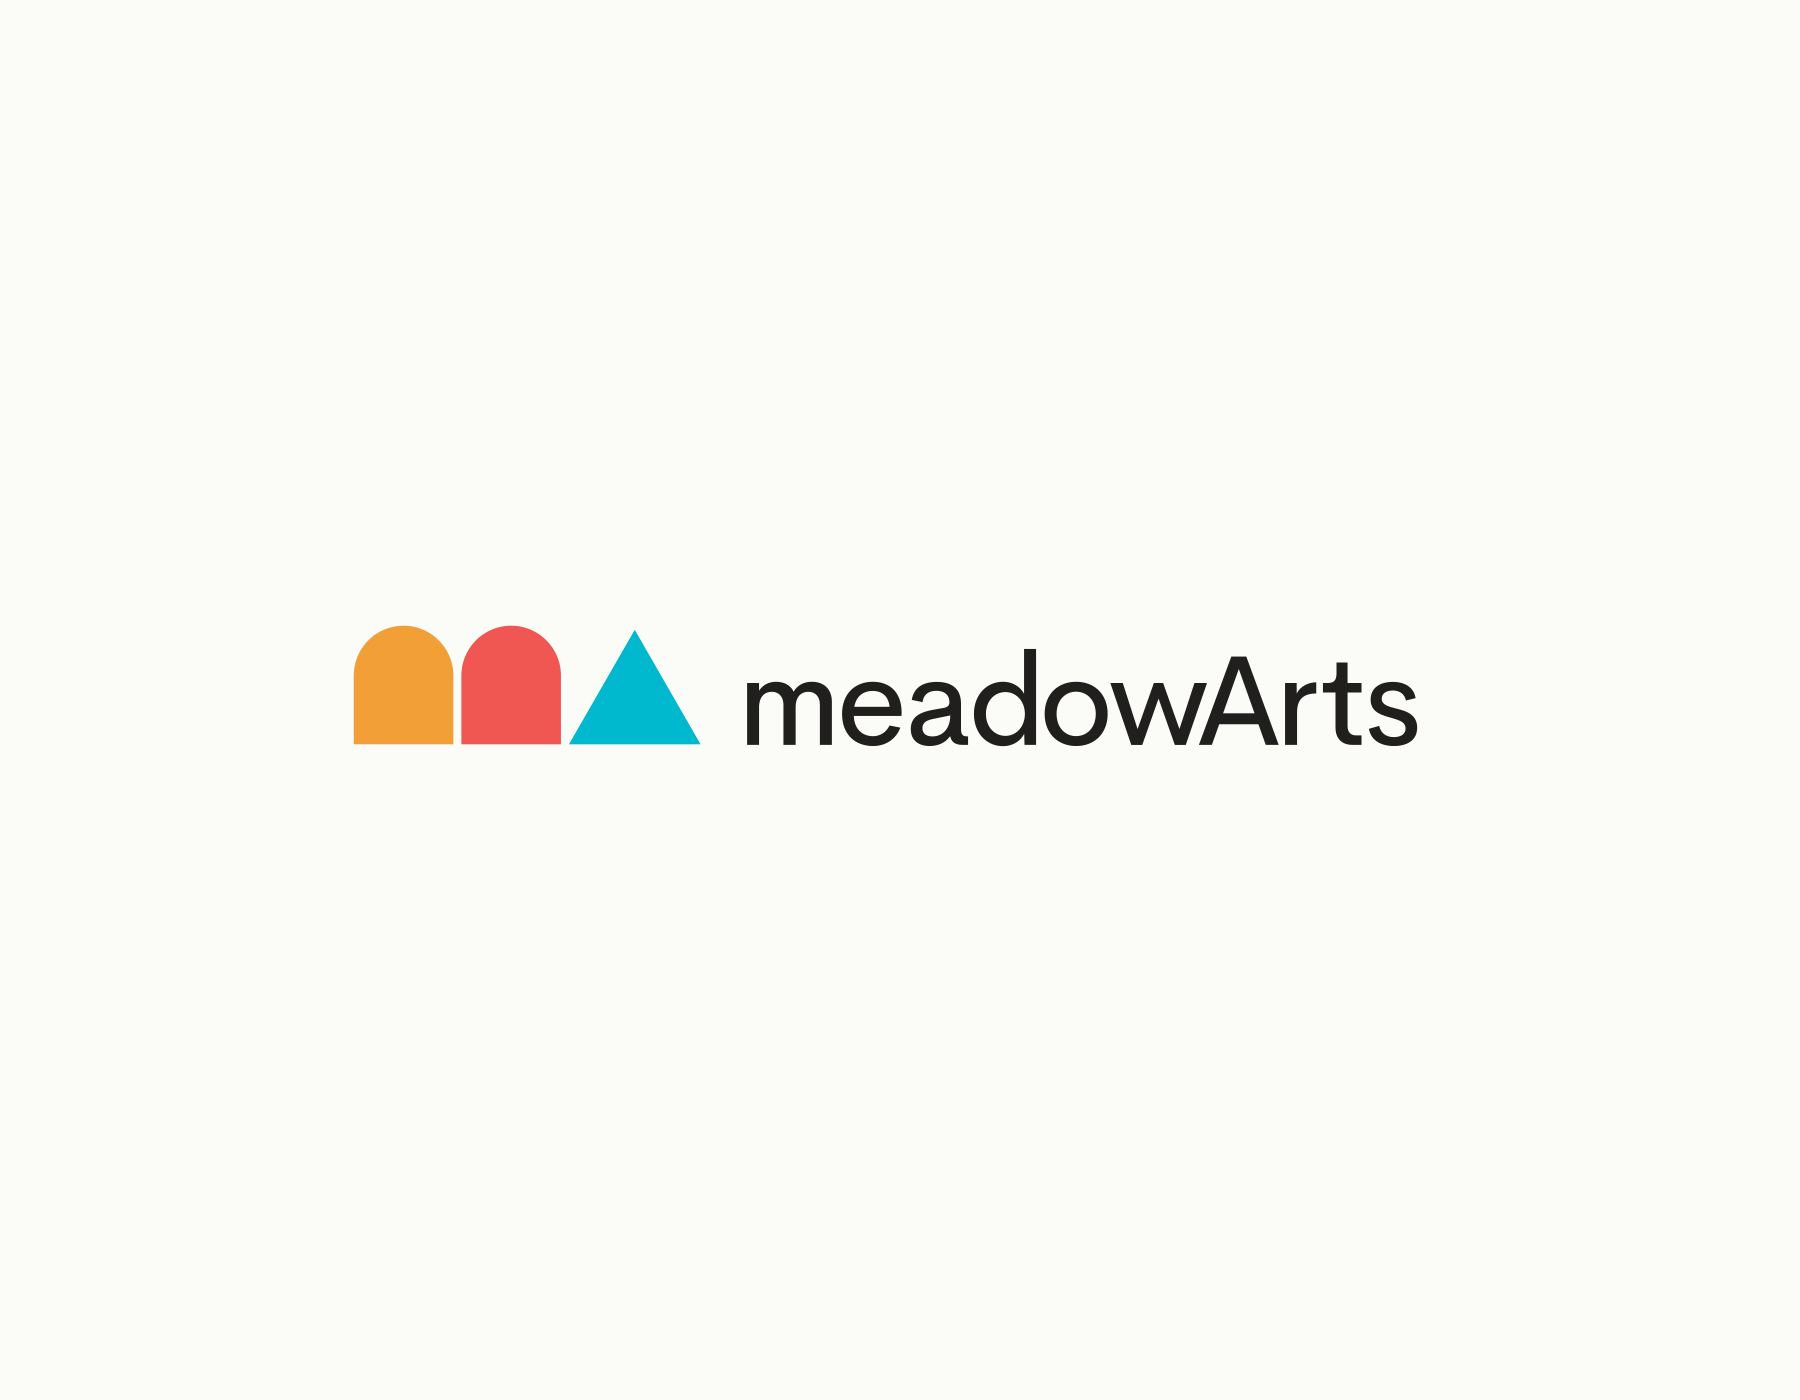 Meadow Arts identity by Colour Format